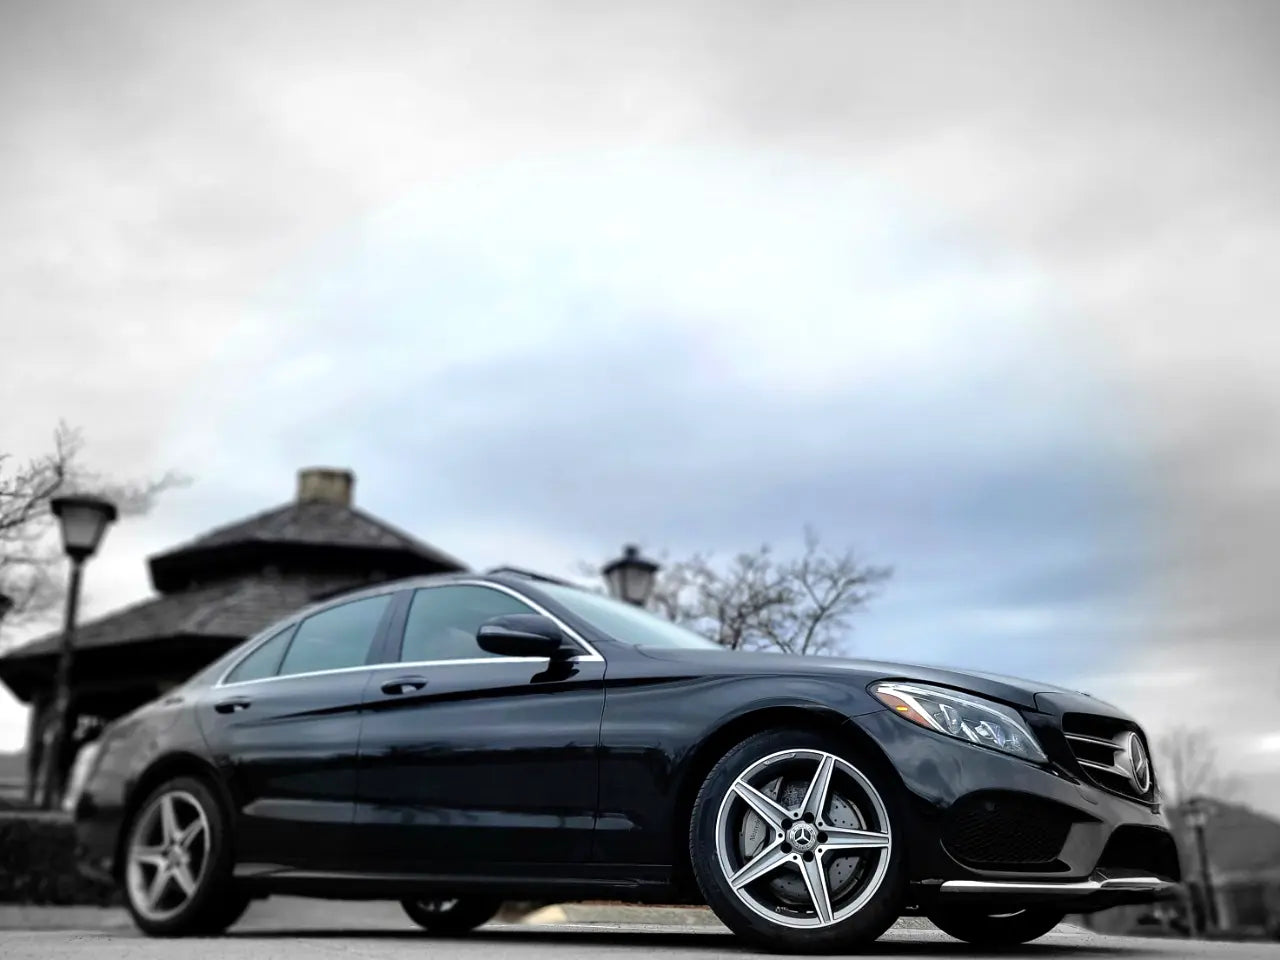 2018 Mercedes-Benz C-Class C 300 4MATIC $1495 DOWN AND DRIVE IN 1 HOUR!